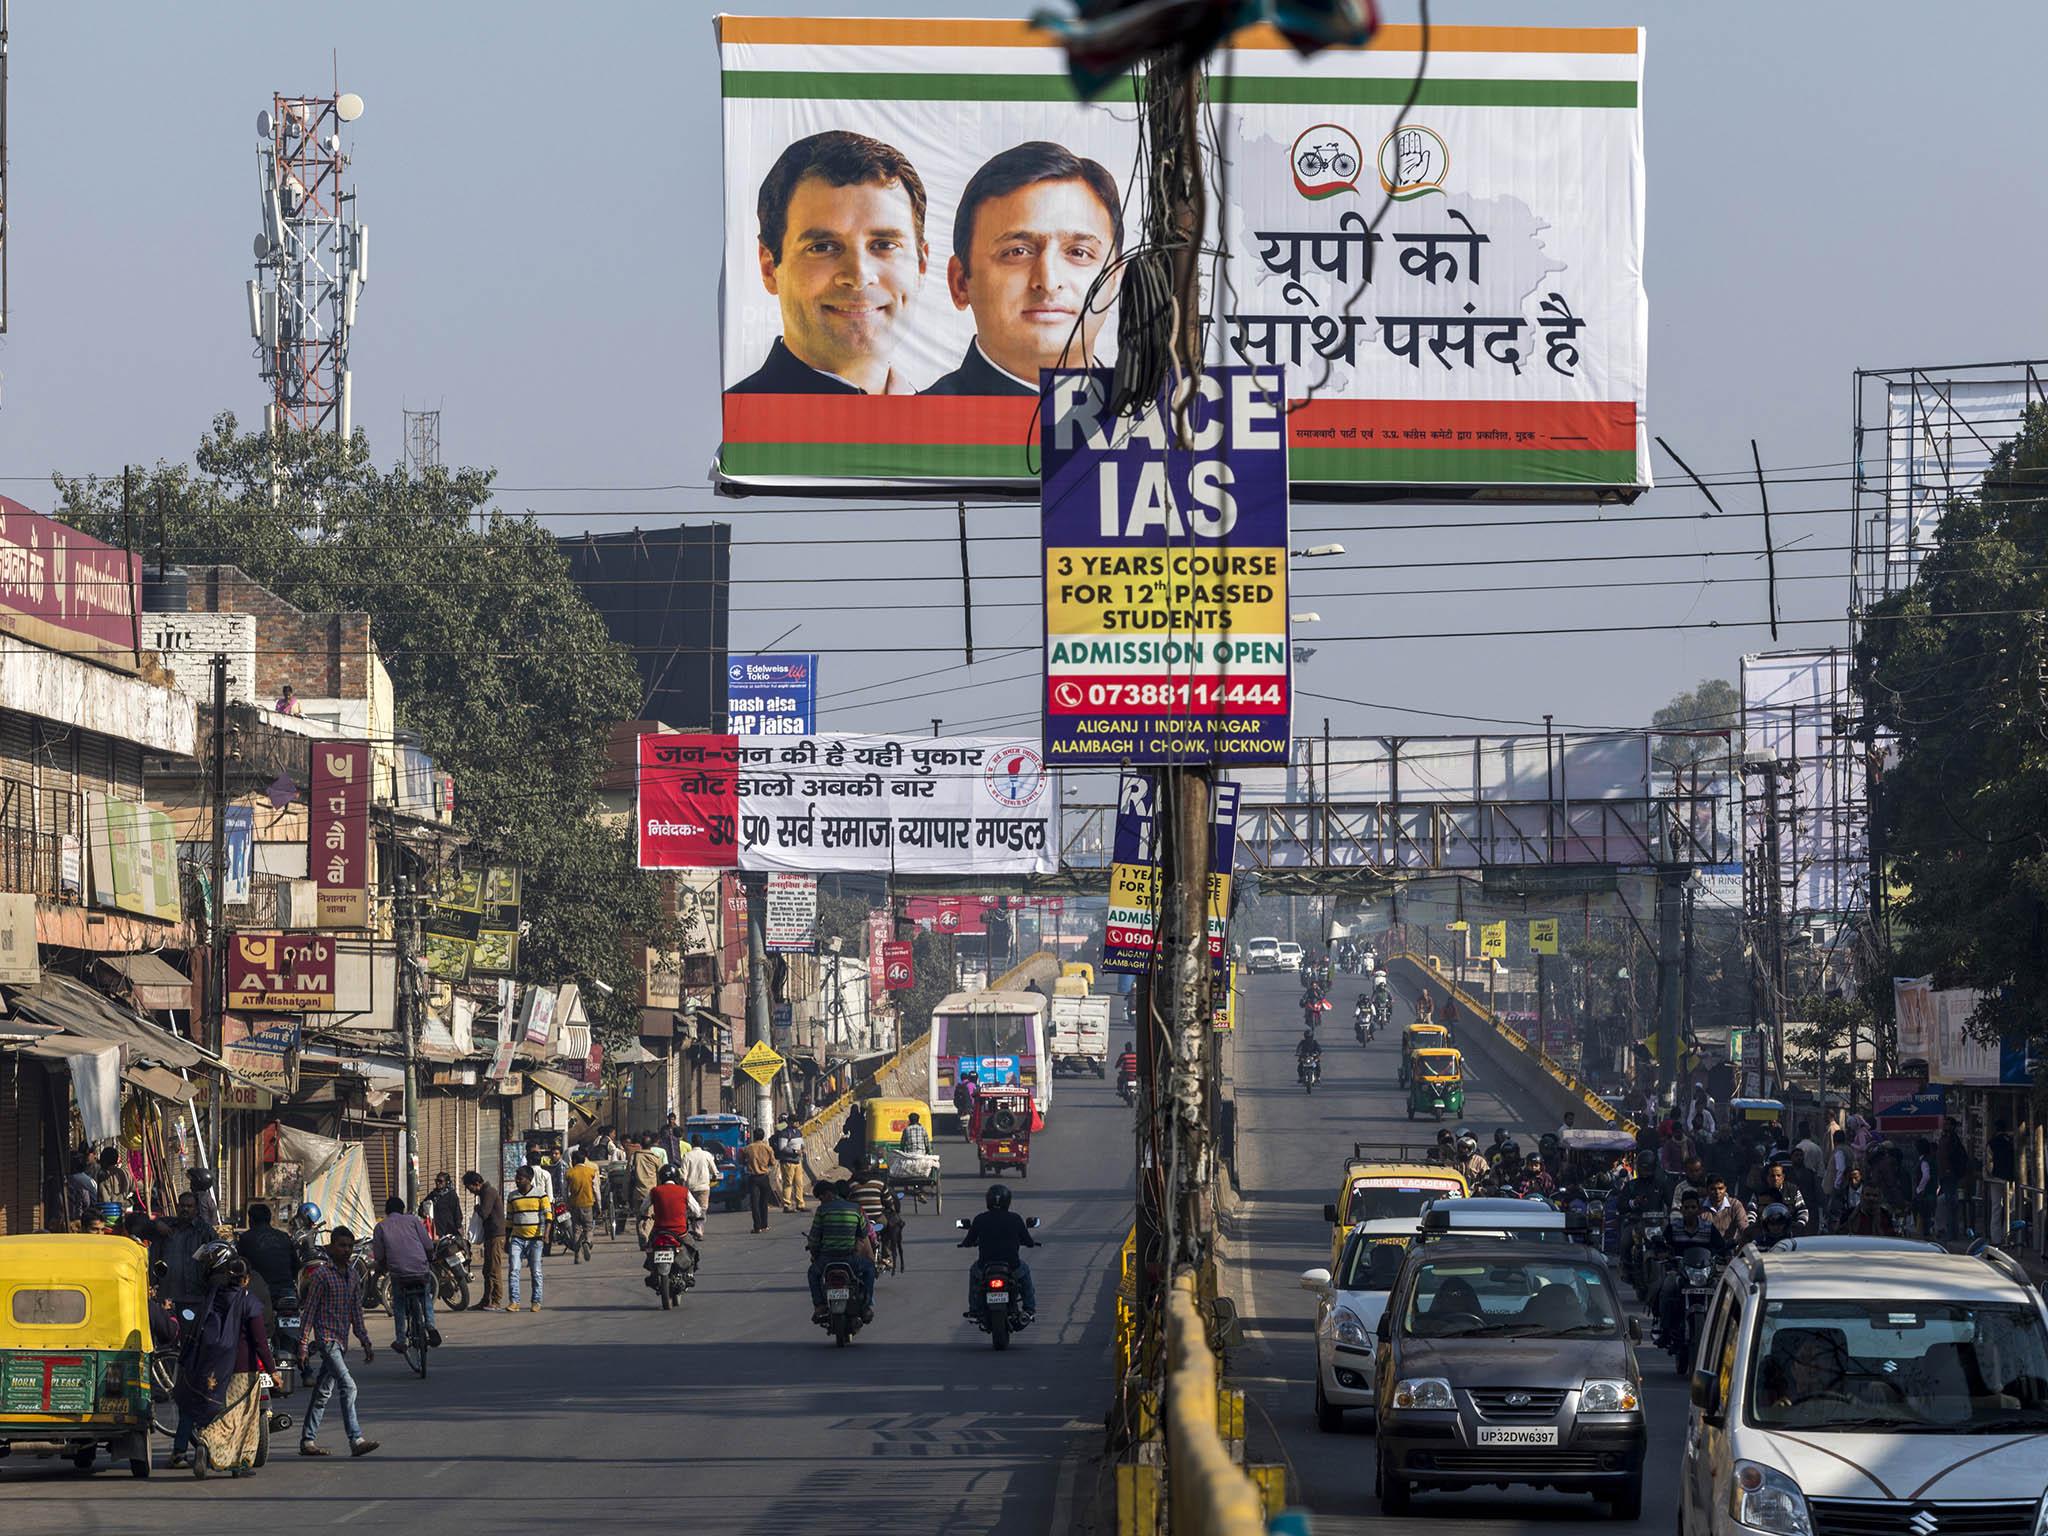 A state election campaign billboard for the joint campaign of the Samajwadi Party (SP) and the Indian National Congress party (INC) in Lucknow (Bloomberg/Getty)